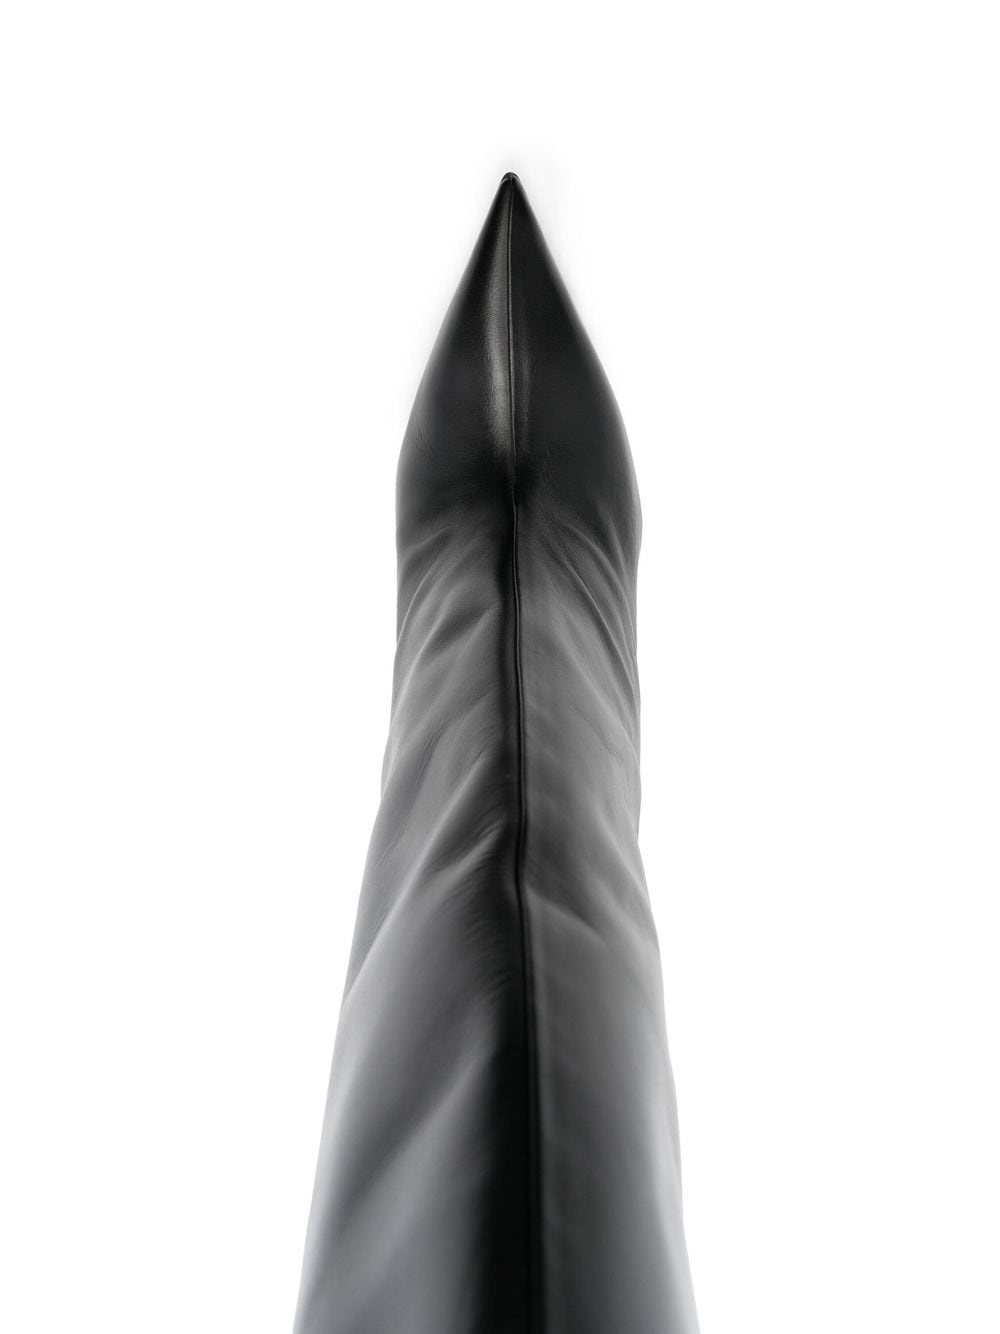 Cheope knee-high 105mm boots - 4